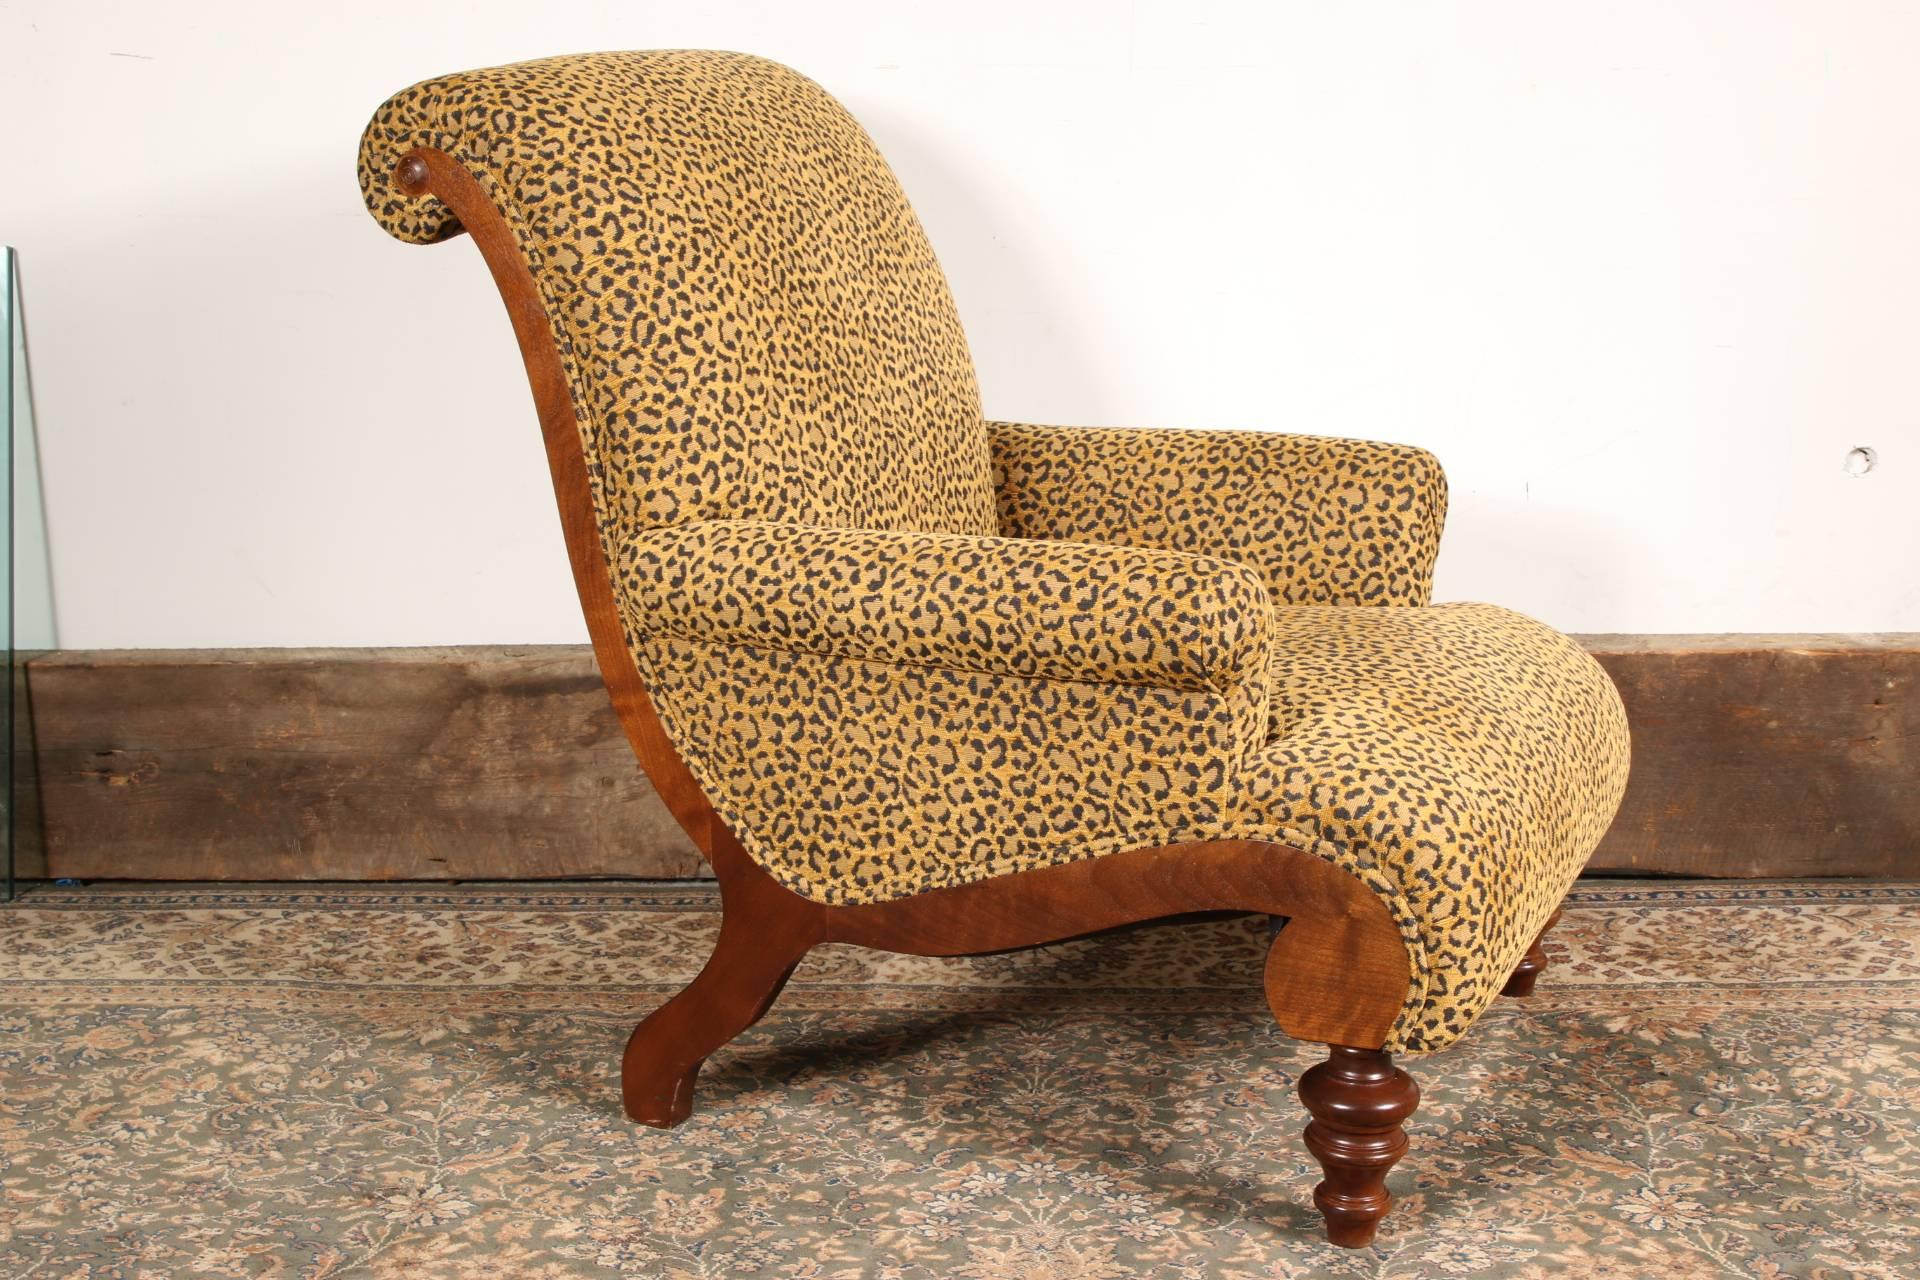 With a scrolled mahogany frame with turned front legs, and upholstered in a tan and black animal print with rolled arms. Very good condition with only very minor wear.